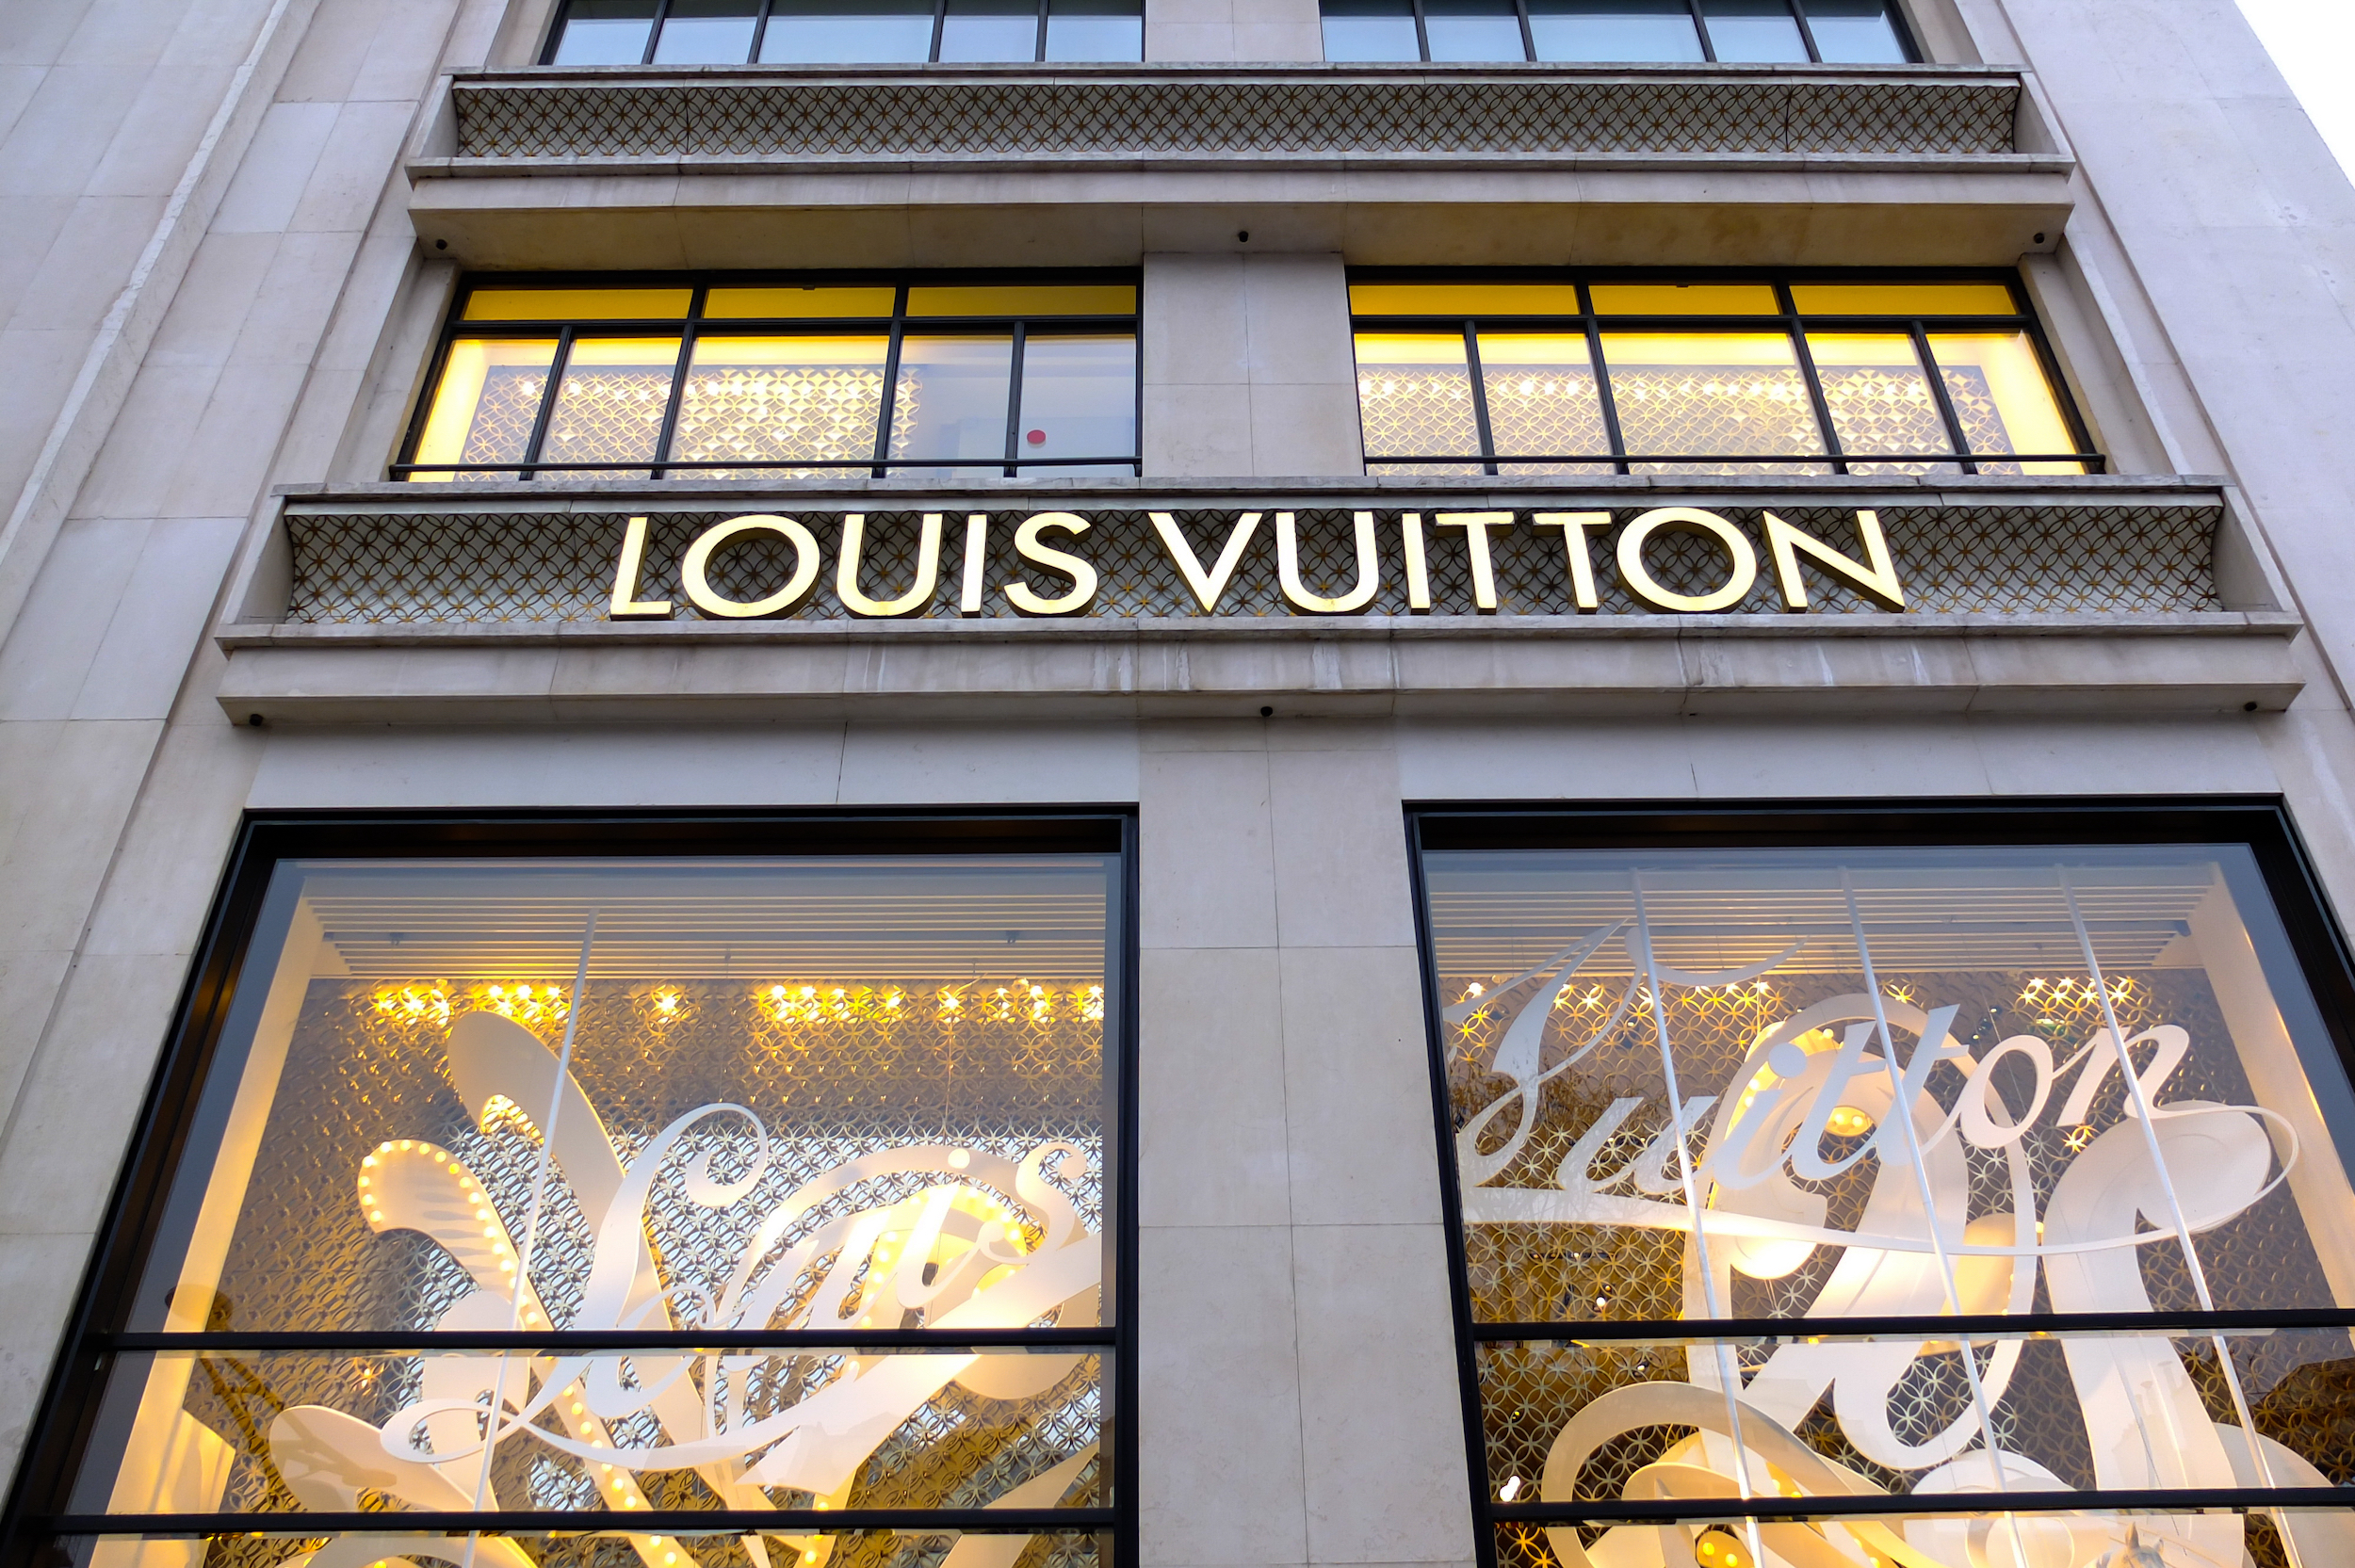 Louis Vuitton vs. Gucci: Which Is More Expensive? - Luxury Viewer